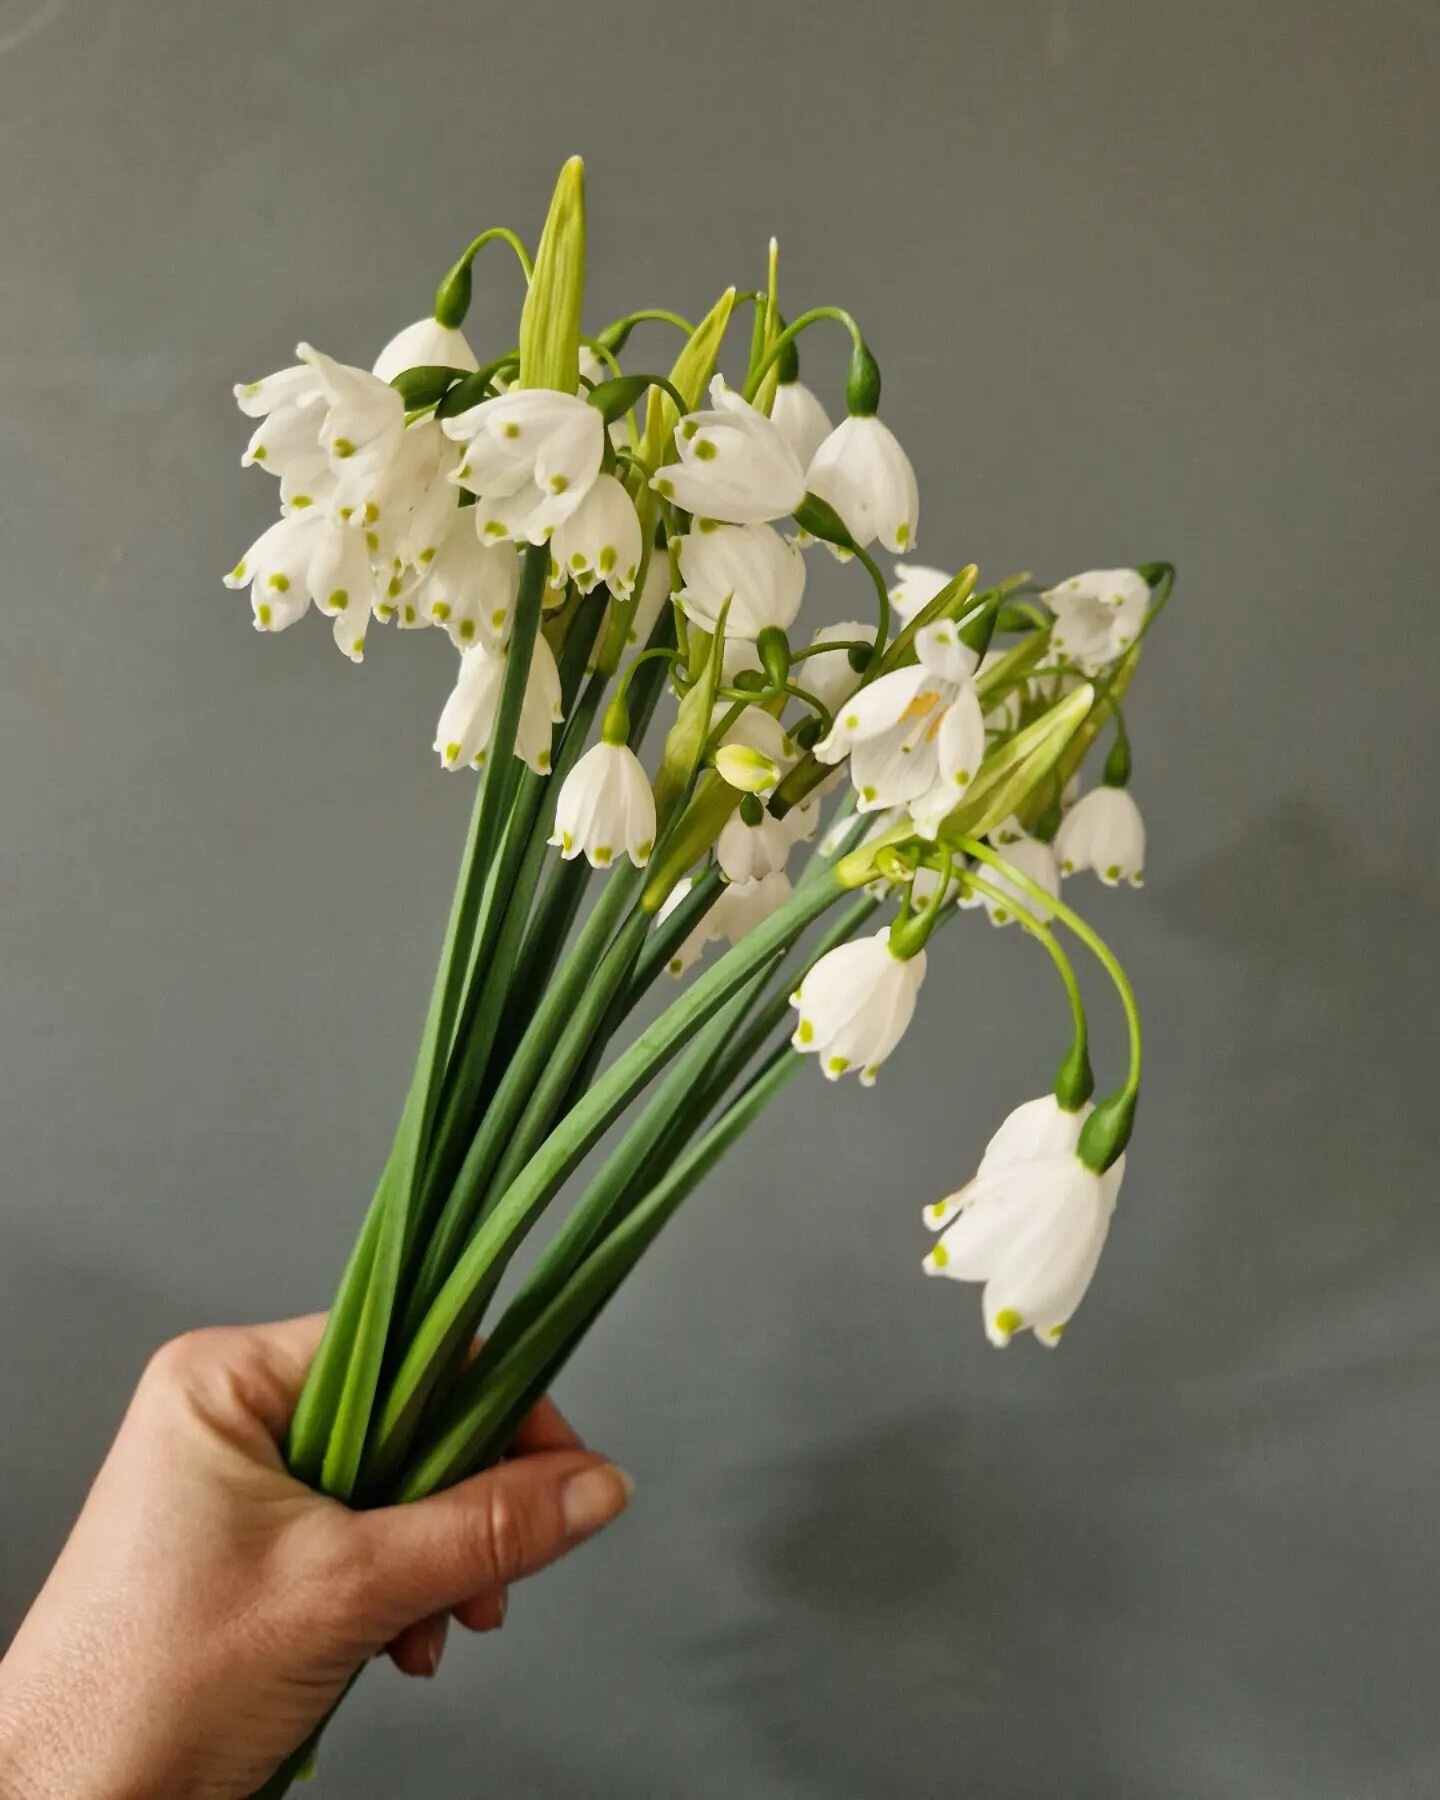 Snowflakes...gotta love these delicate flowers for creating a bit of bounce in a Spring bouquet 🥰

#springflowers #britishflowers #bristolflorist #floralinspiration #flowersfromthefarm #britishgrownflowers #britishgrowers #growninbristol